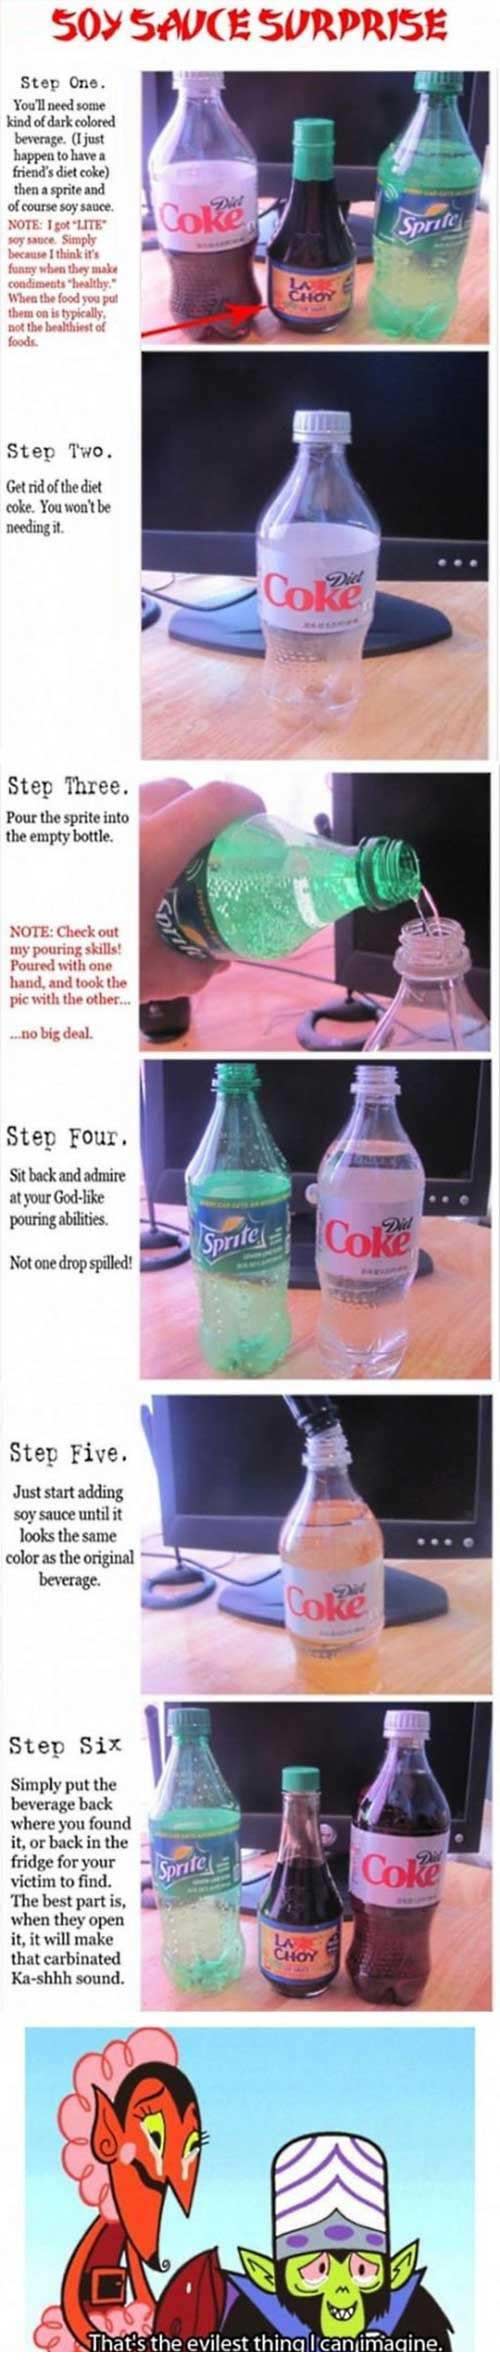 April Fool's Prank: "Soy Sauce Suprise"  Combine Sprite and Soy Sauce in a Diet Coke bottle